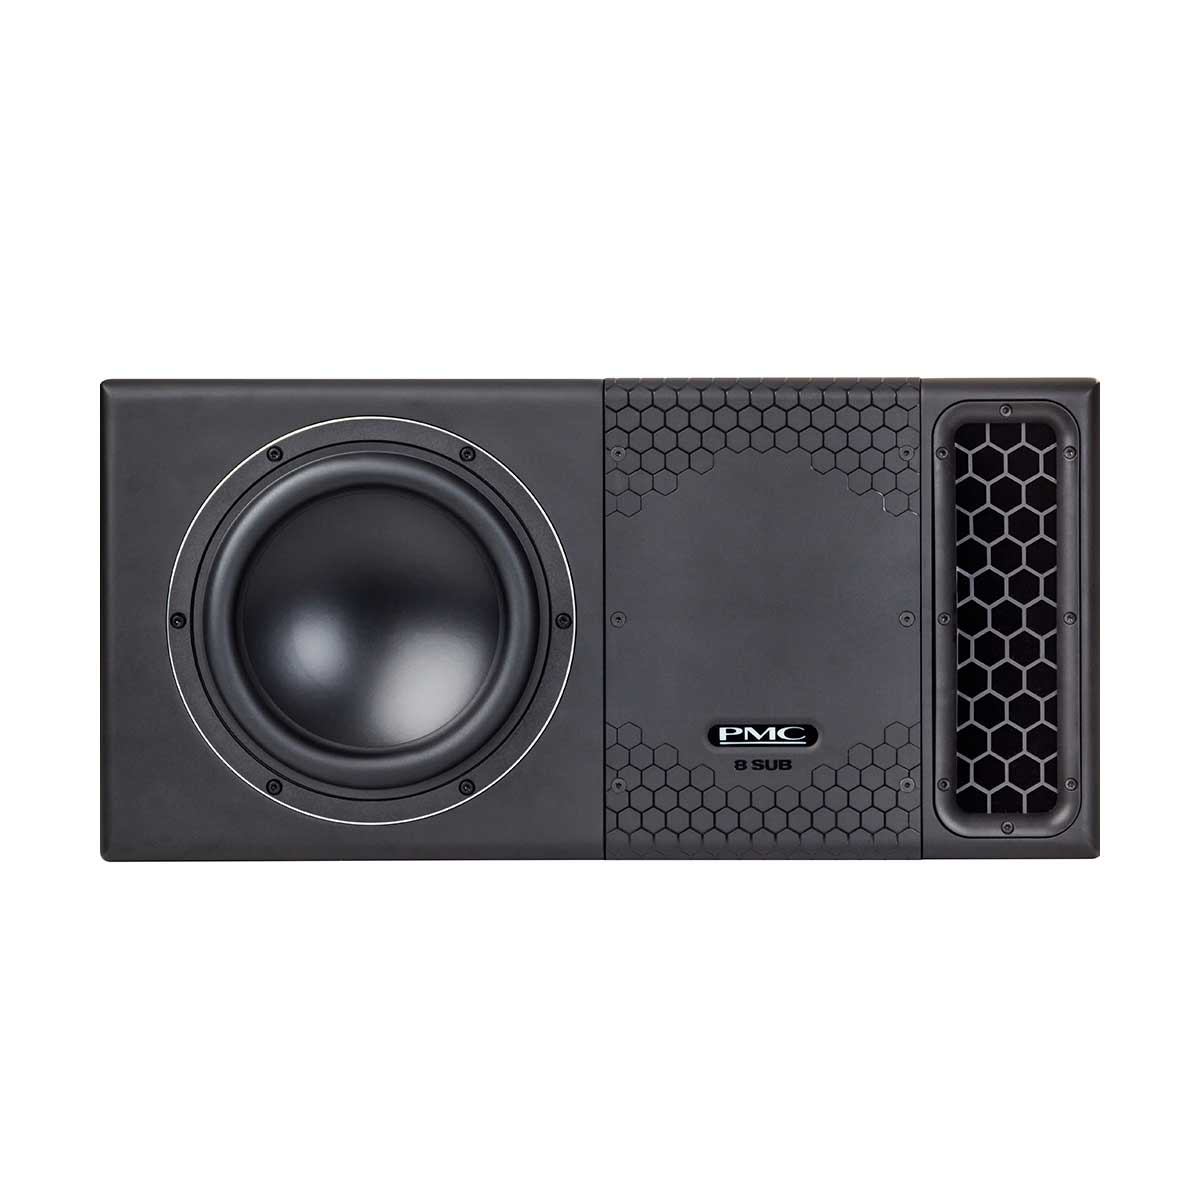 PMC PMC8 Sub low-frequency Reference Monitor